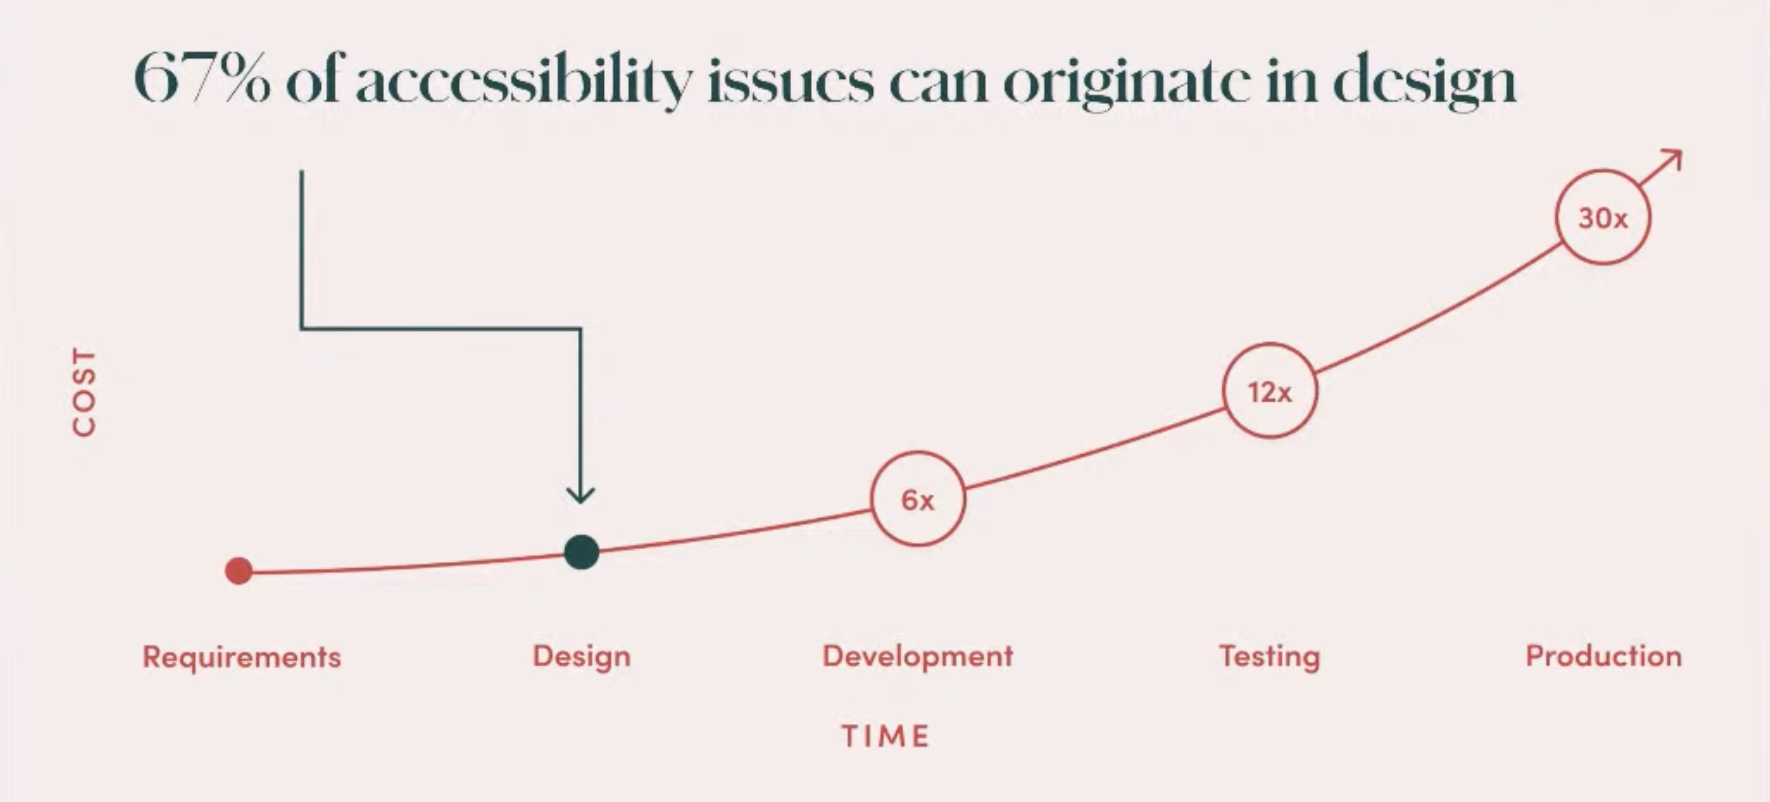 Graph with the headline "67% of accessibility issues can originate in design" pointing out how much time it takes to fix accessibility errors later (development 6x, testing 12x, production 30x)